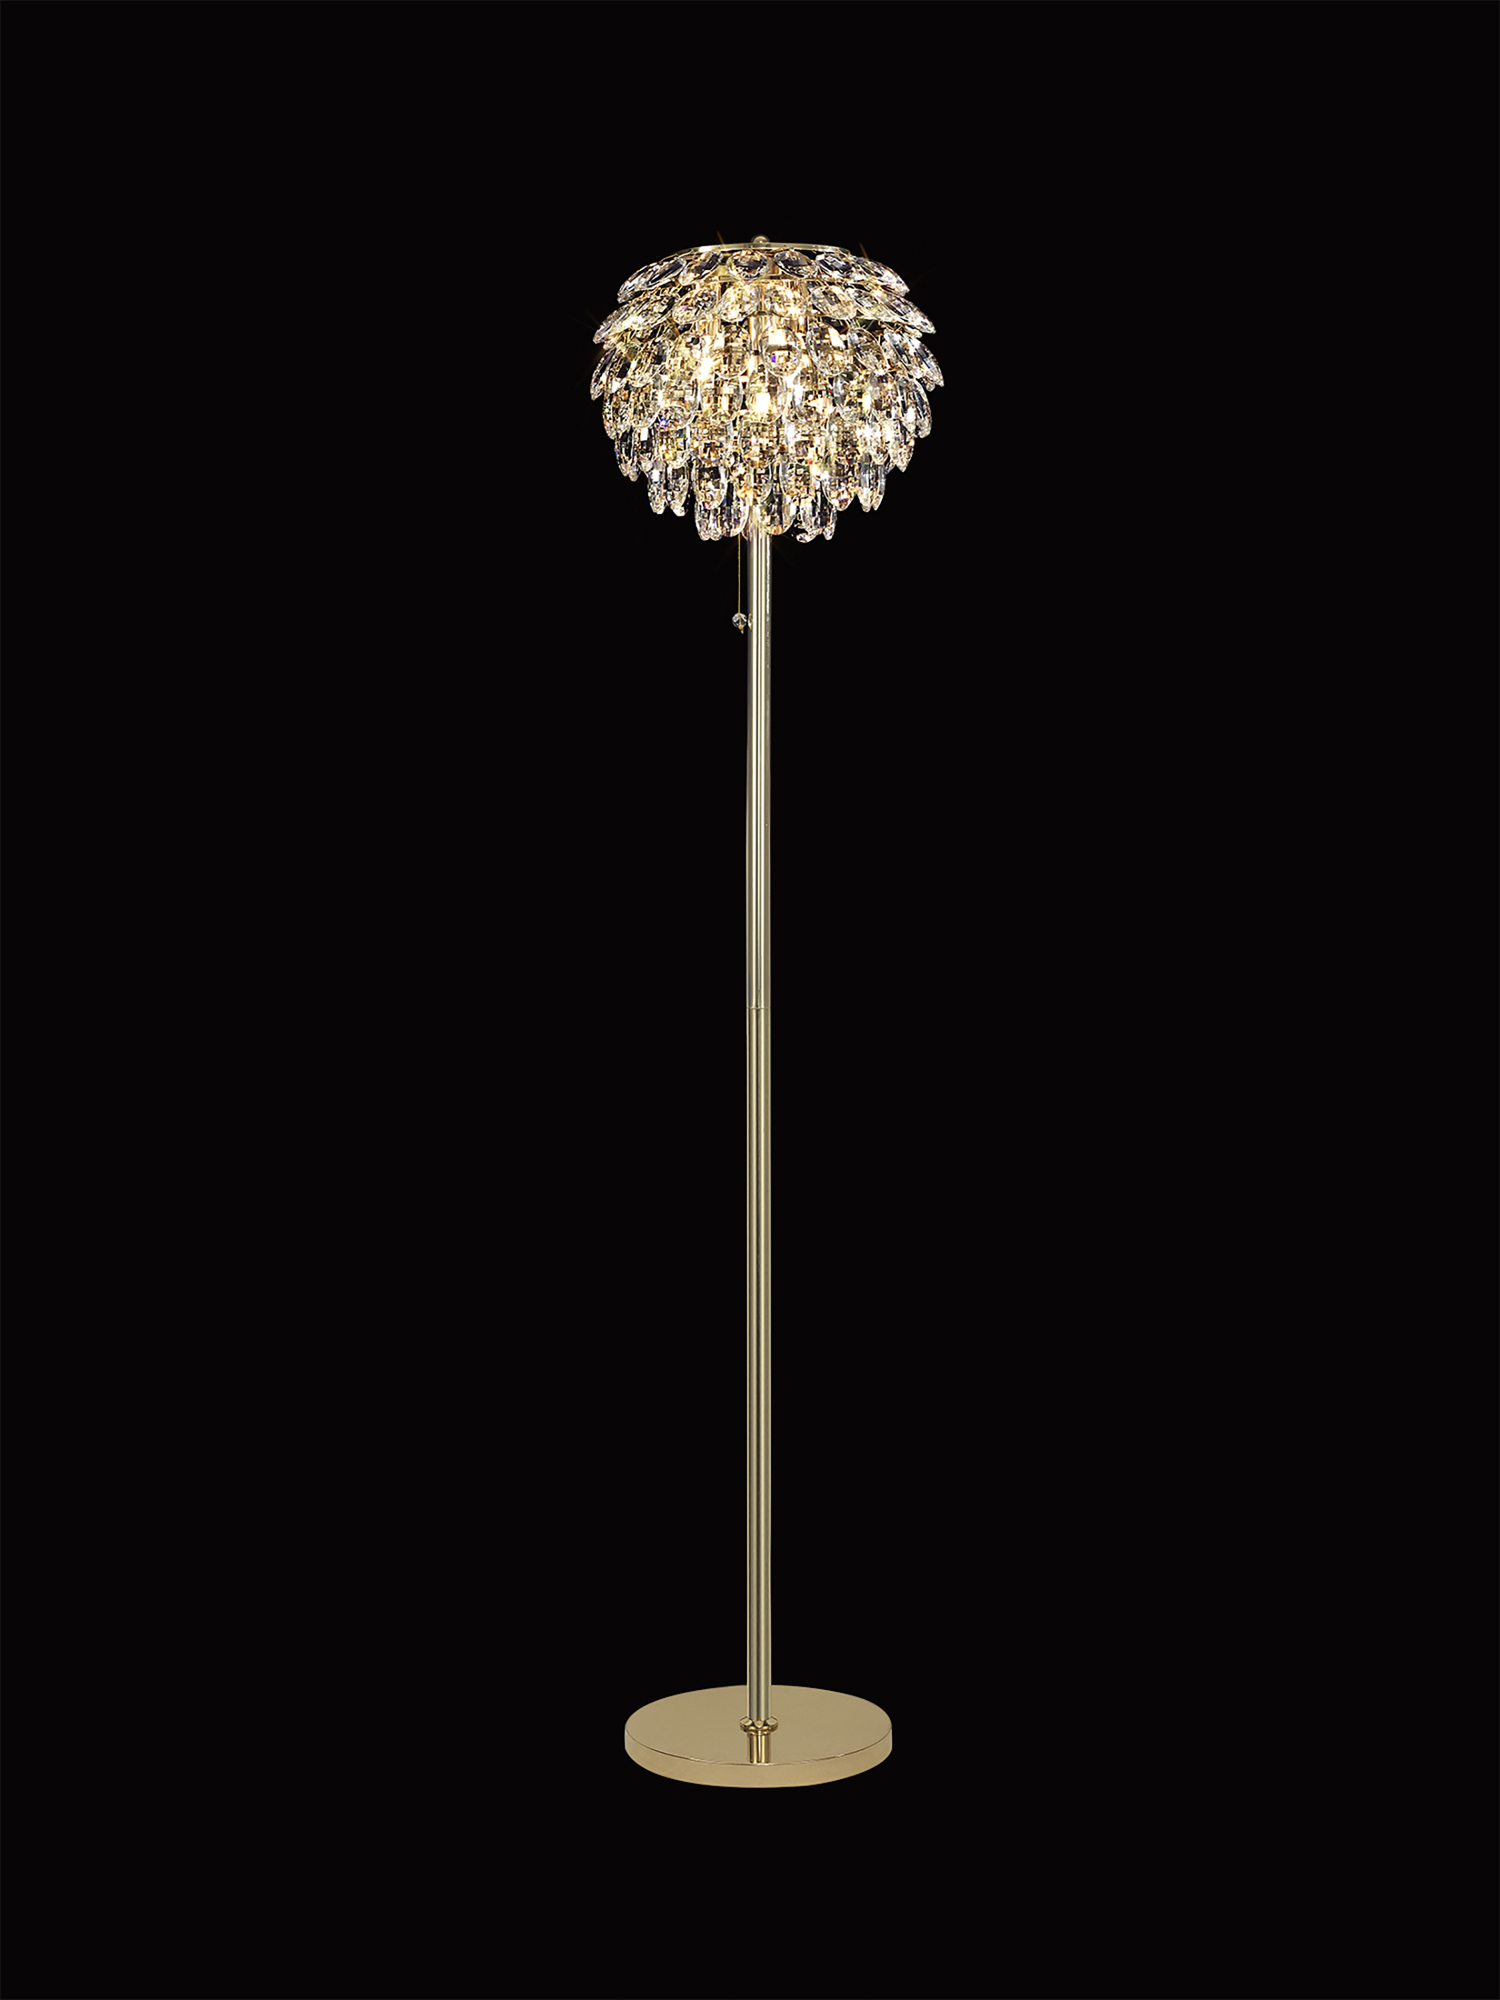 Coniston French Gold Crystal Floor Lamps Diyas Contemporary Crystal Floor Lamps